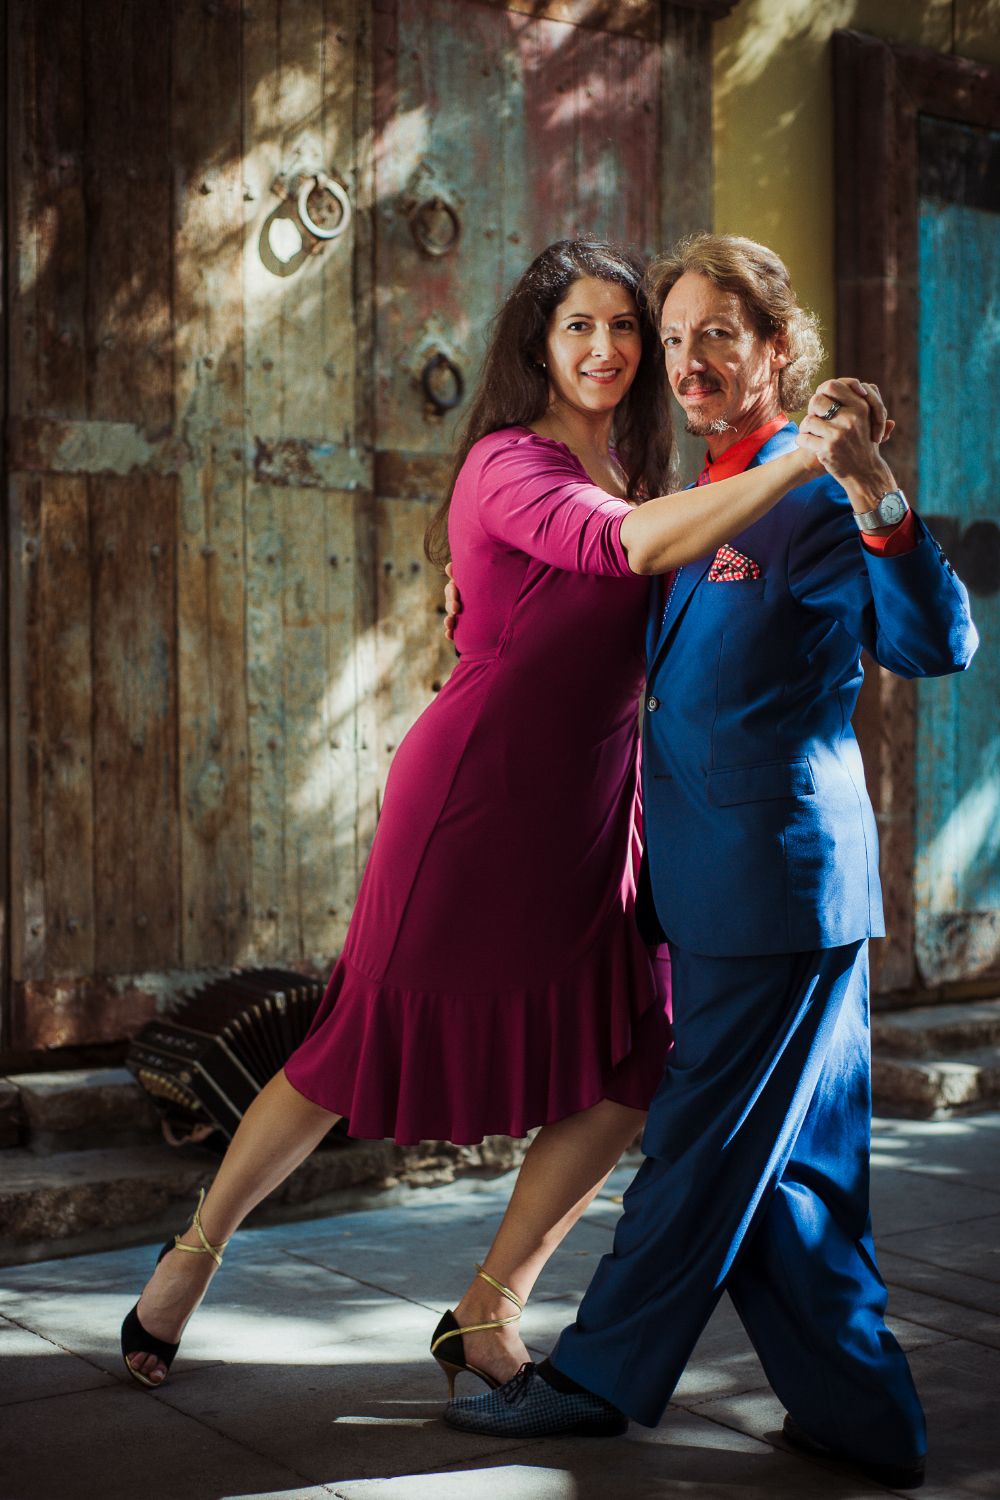 Argentine Tango Masters Marcelo Solis and Mimi in the San Francisco Bay Area